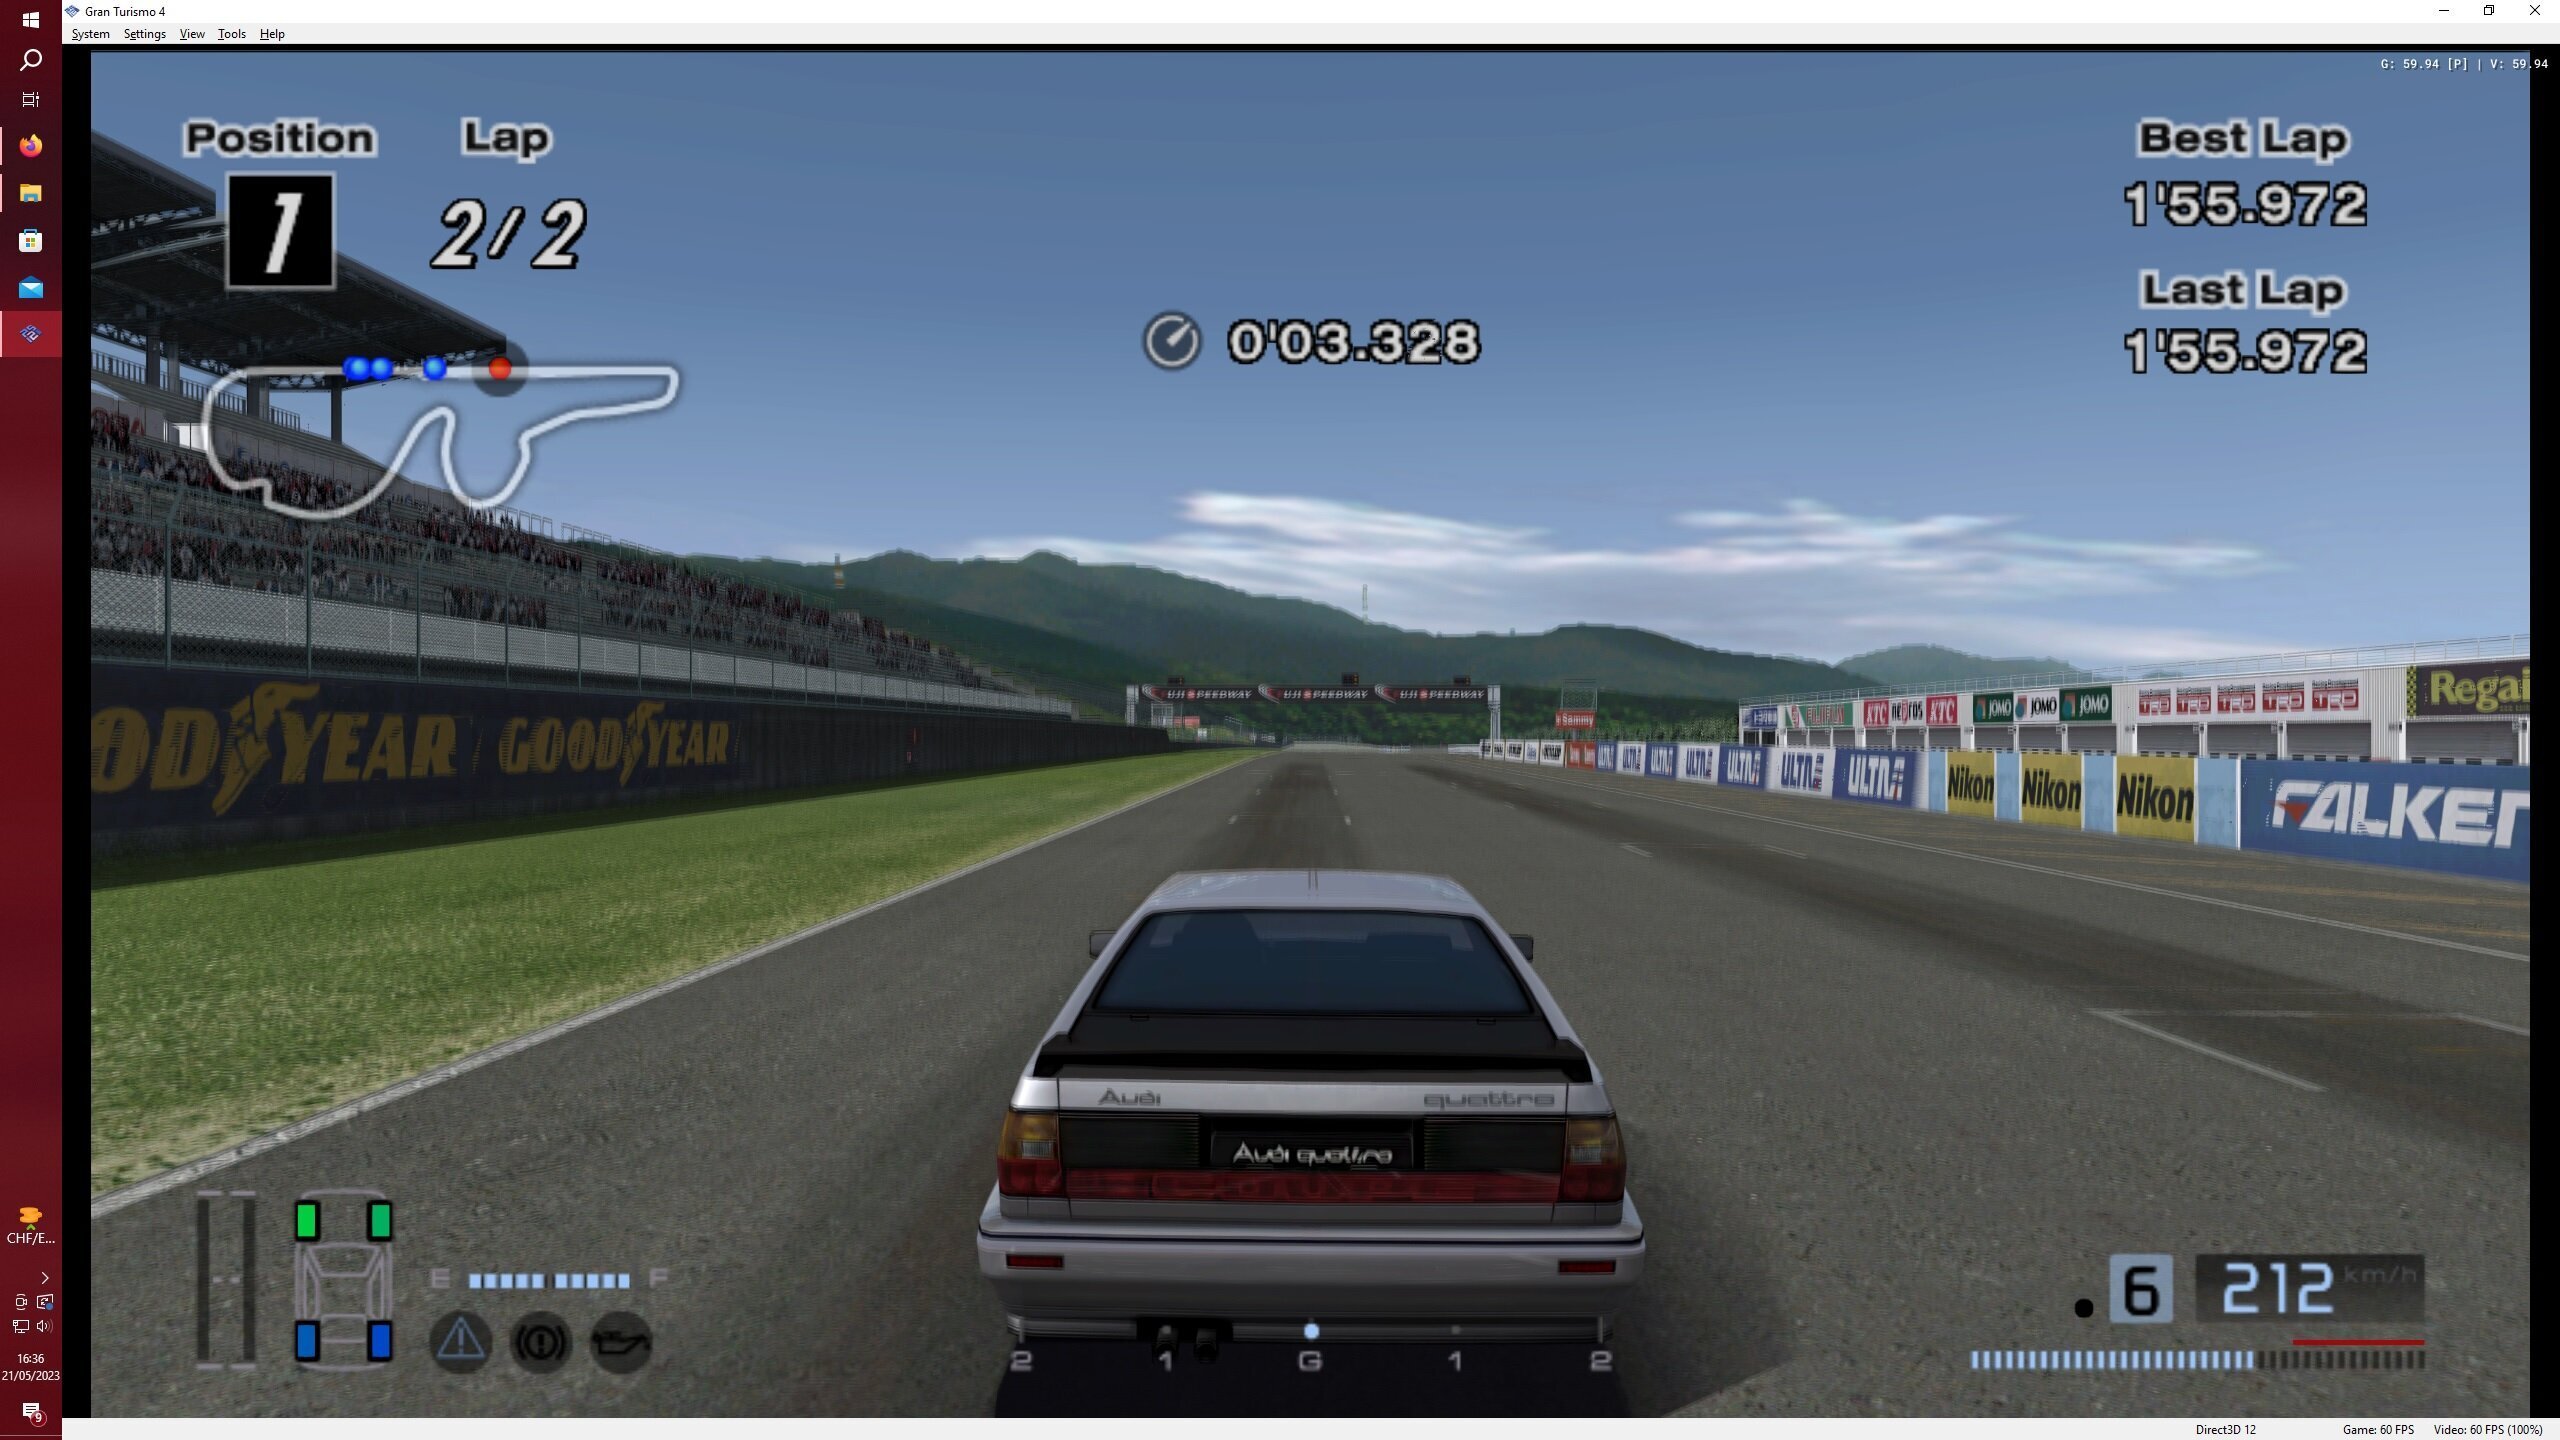 Gran Turismo 4 gets remastered on PC thanks to these mods